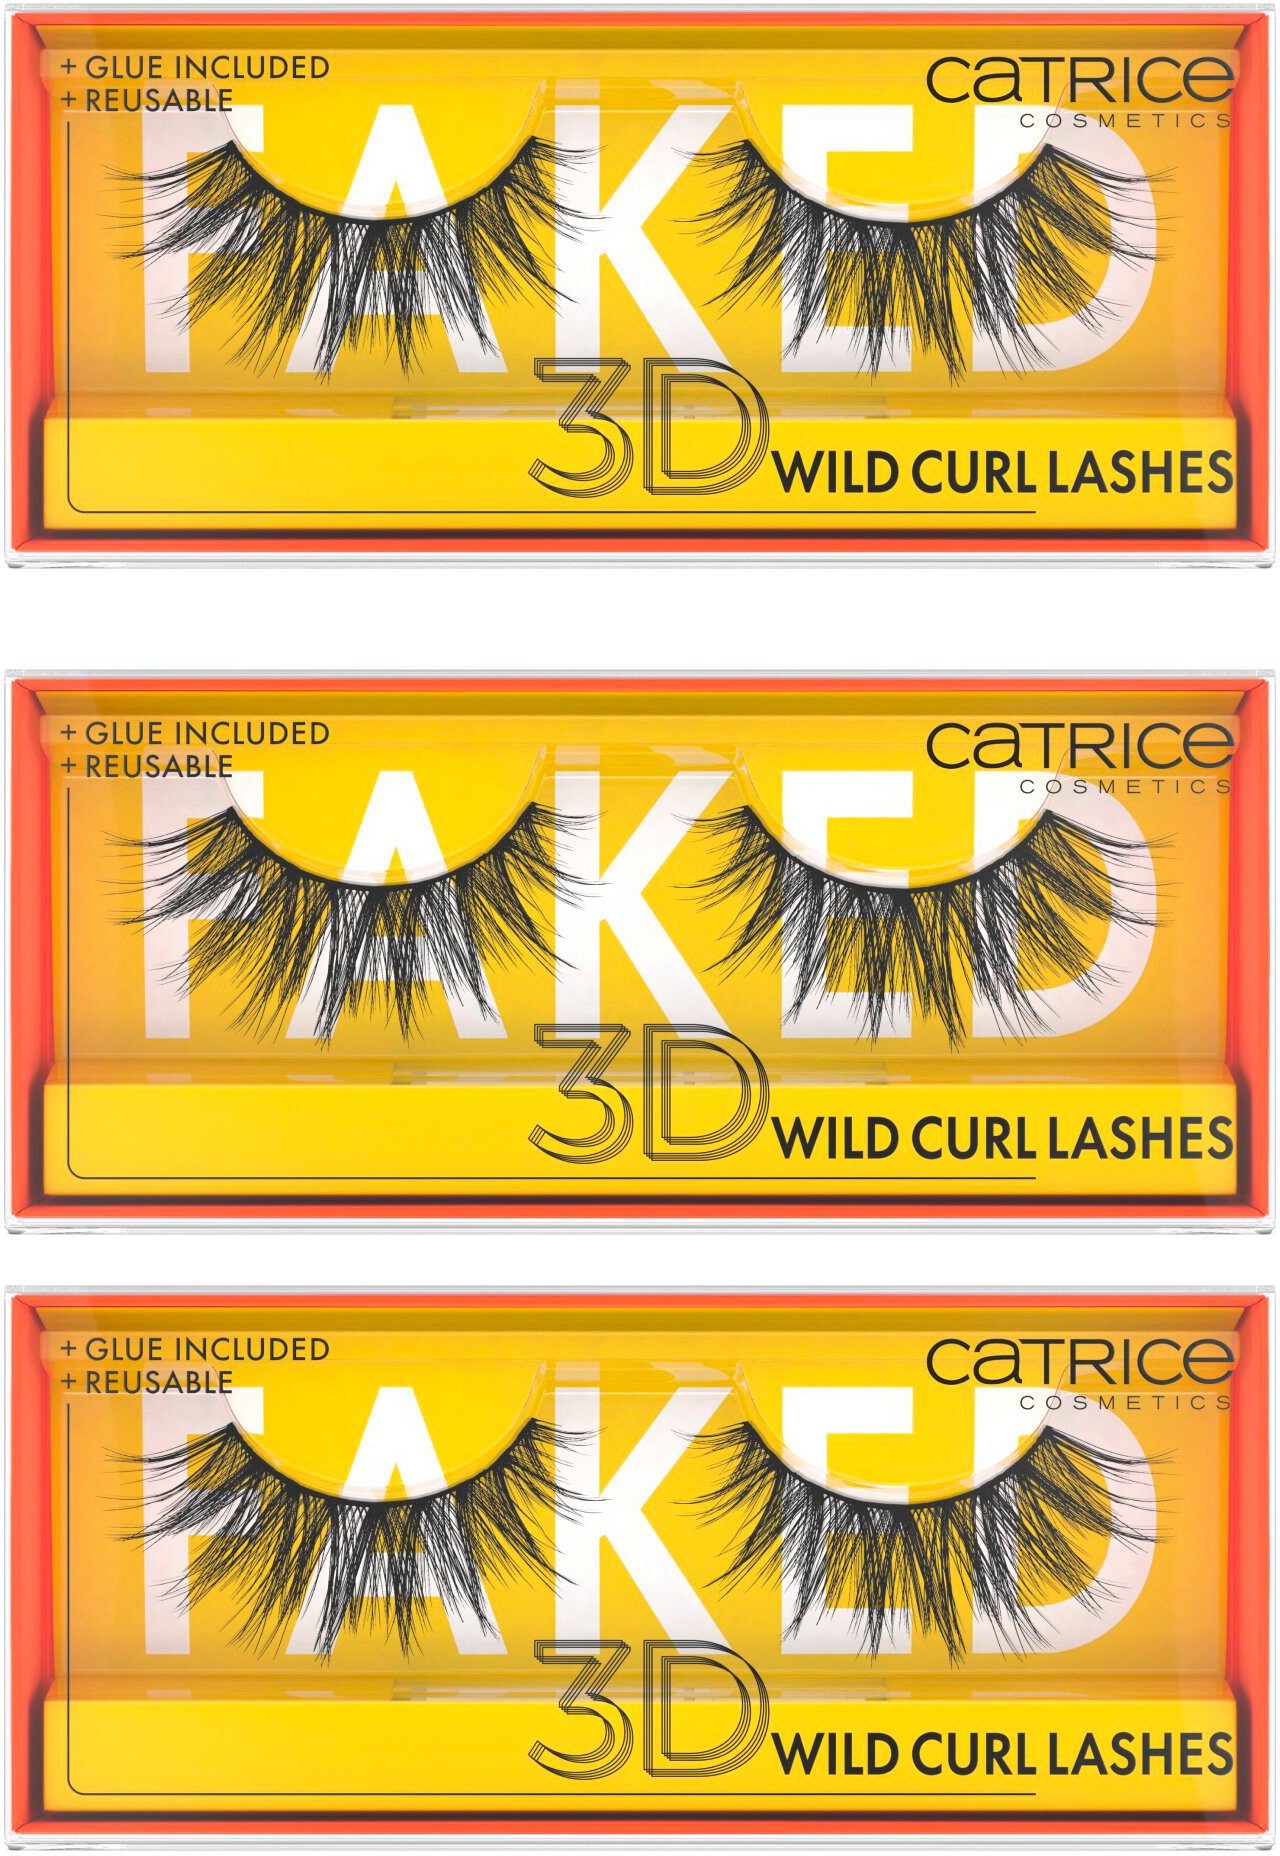 Catrice Bandwimpern Faked 3D Wild Curl Lashes, Set, 3